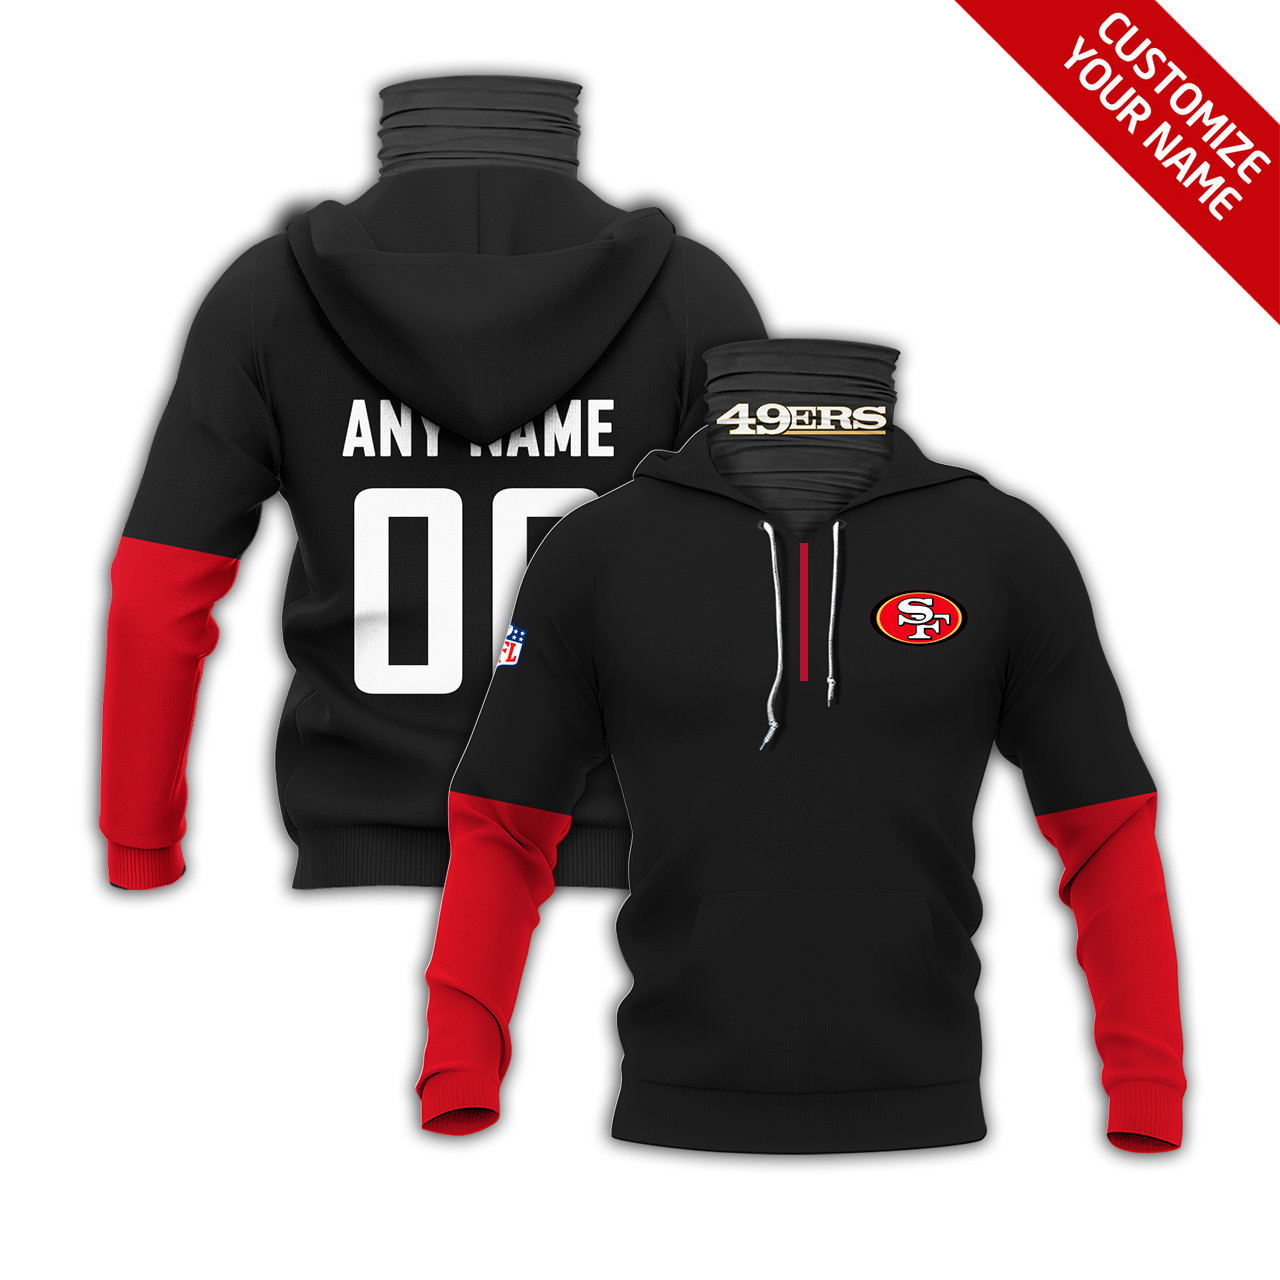 San Francisco 49ers Navorro Bowman #53 Nfl Super Bowl Champions Black Style Gift For 49ers And Bowman Fans Hoodie